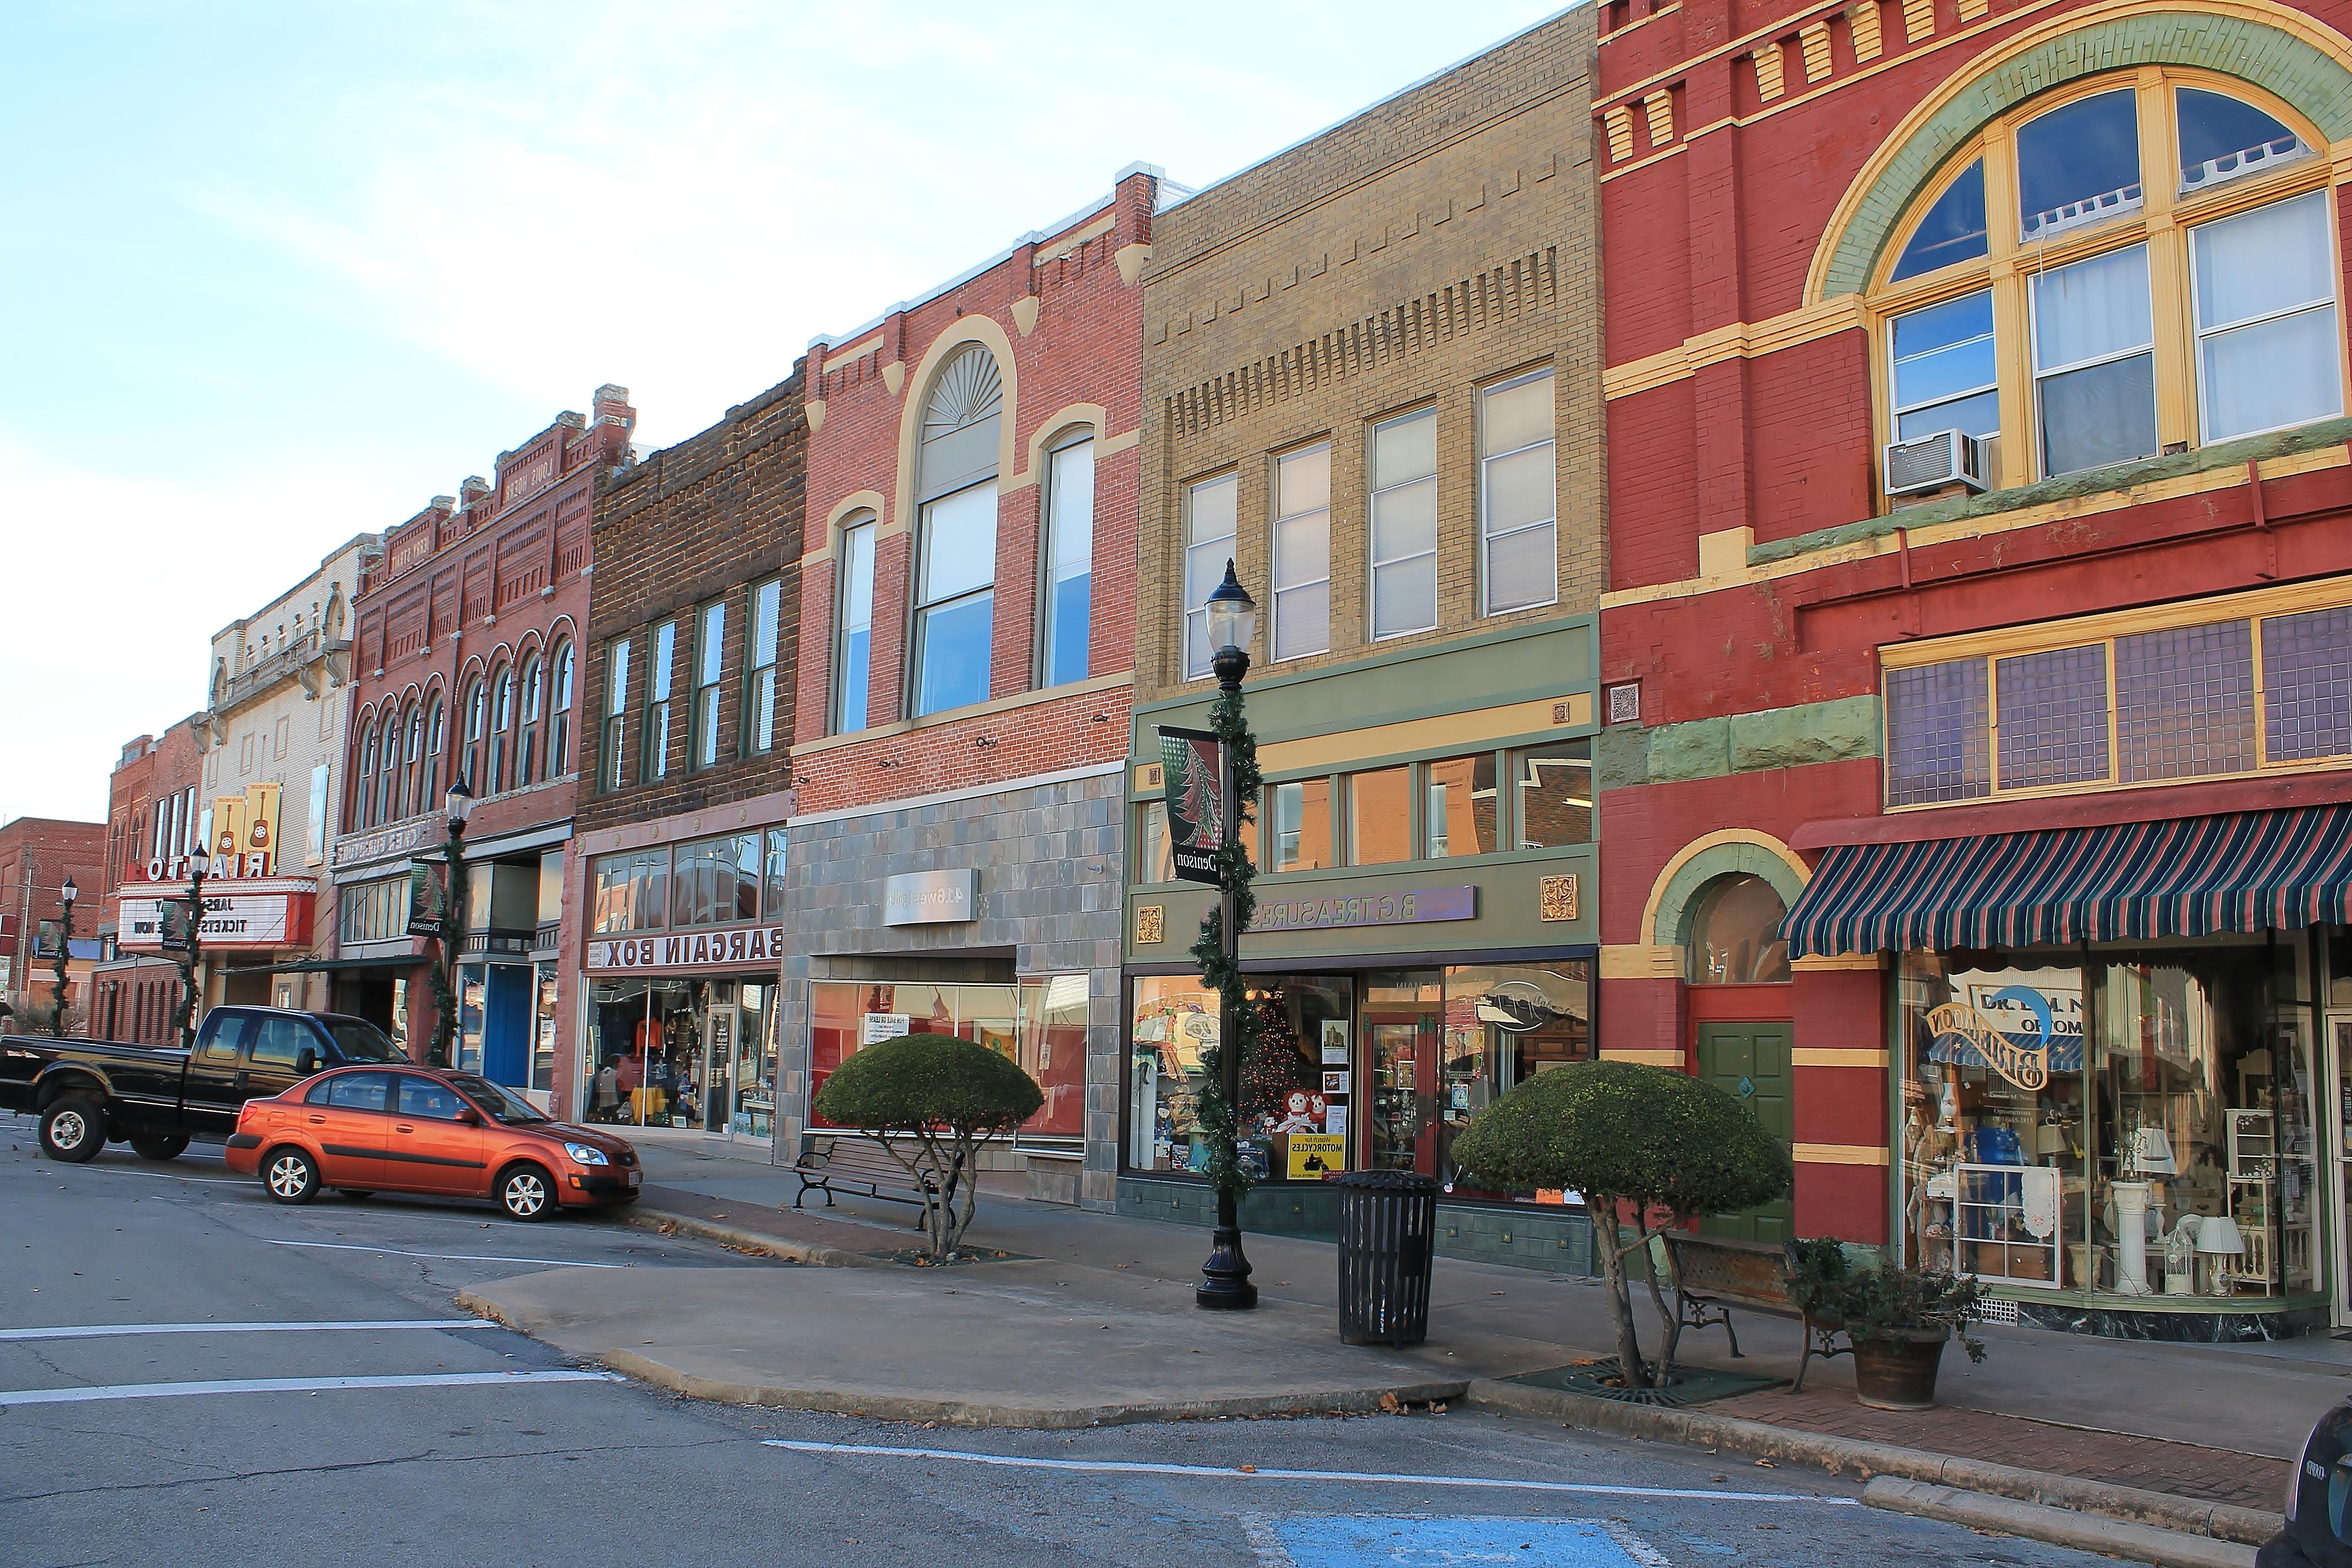 View of shops and restaurants lining historic commercial street in Denison TX